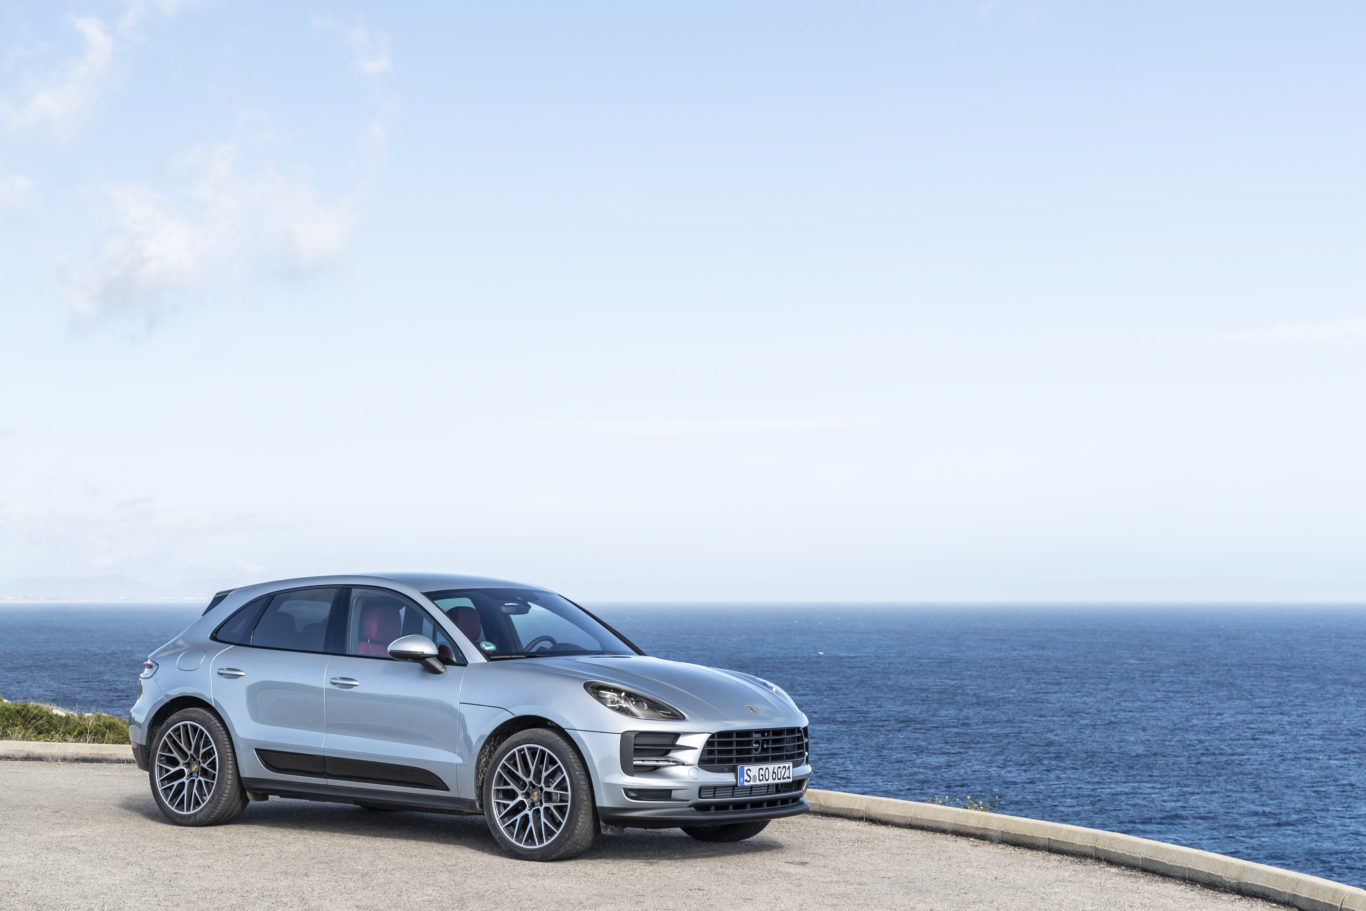 The Macan is the smallest SUV that Porsche currently makes